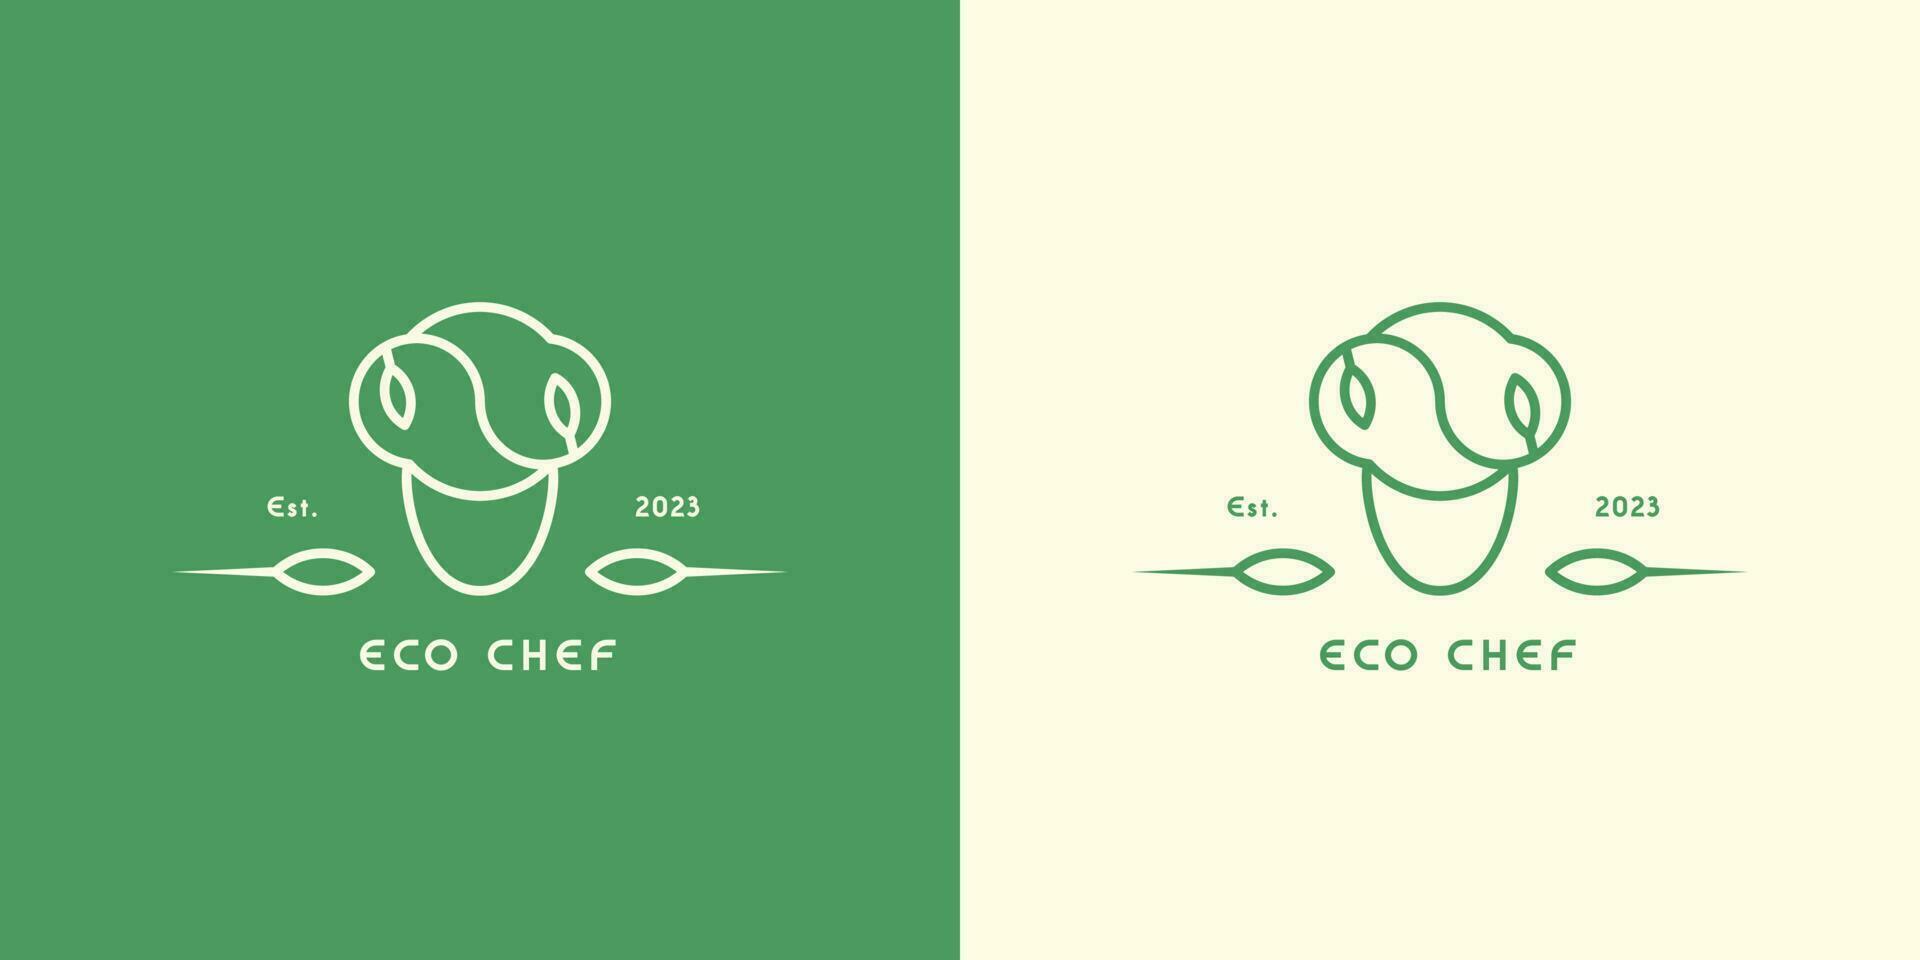 Eco Chef logo design illustration Icon vector symbol flat simple character silhouette clean profession cafe diner elegant minimalist line. Head of cafe leaf lunch diner canteen organic kitchen